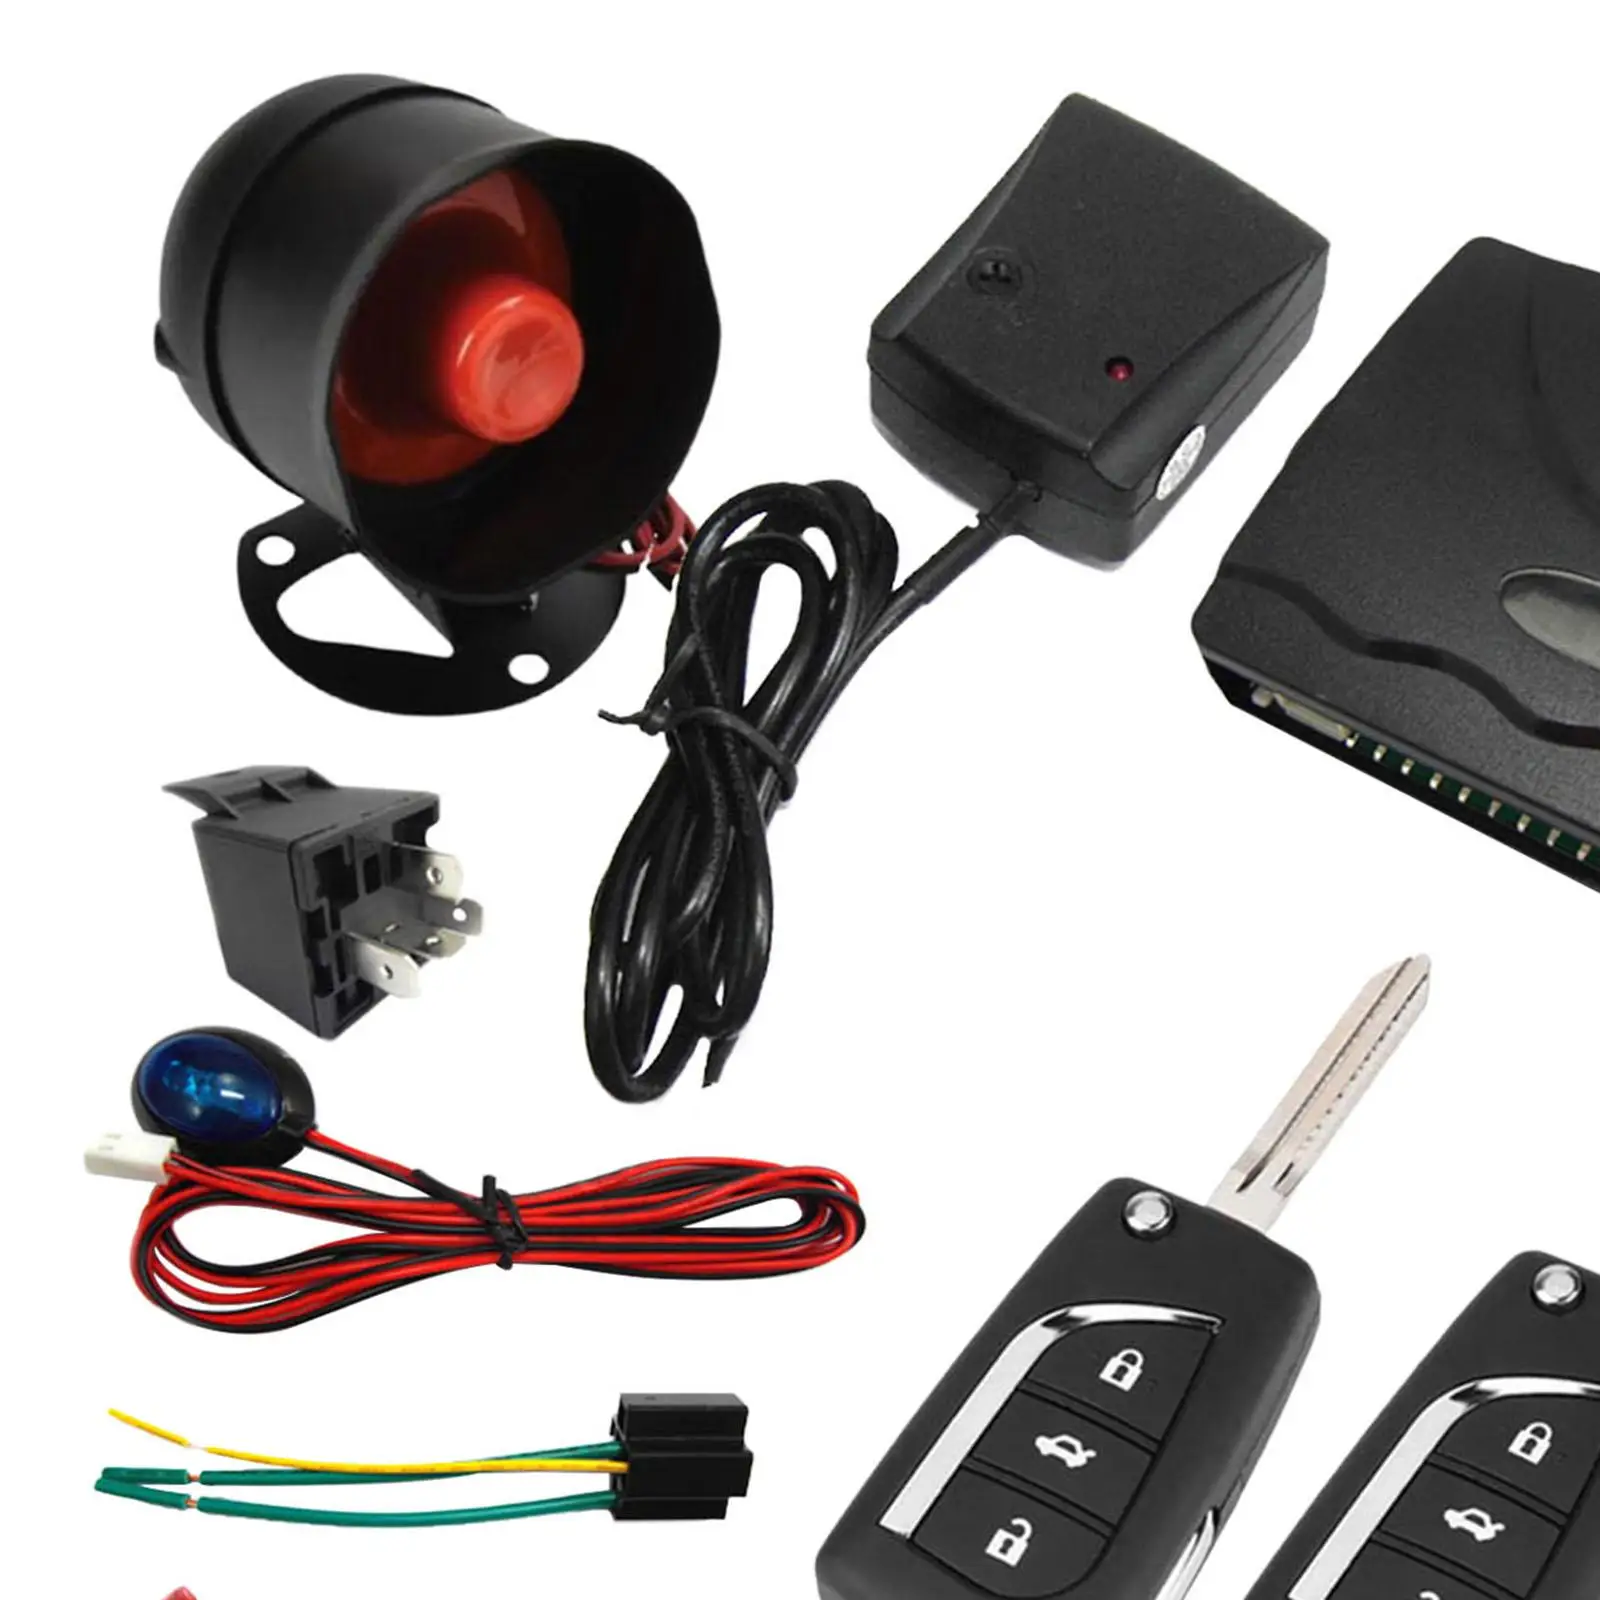 1 Way Remote Start and Keyless Entry System Car Alarm Security System with Shock Sensor